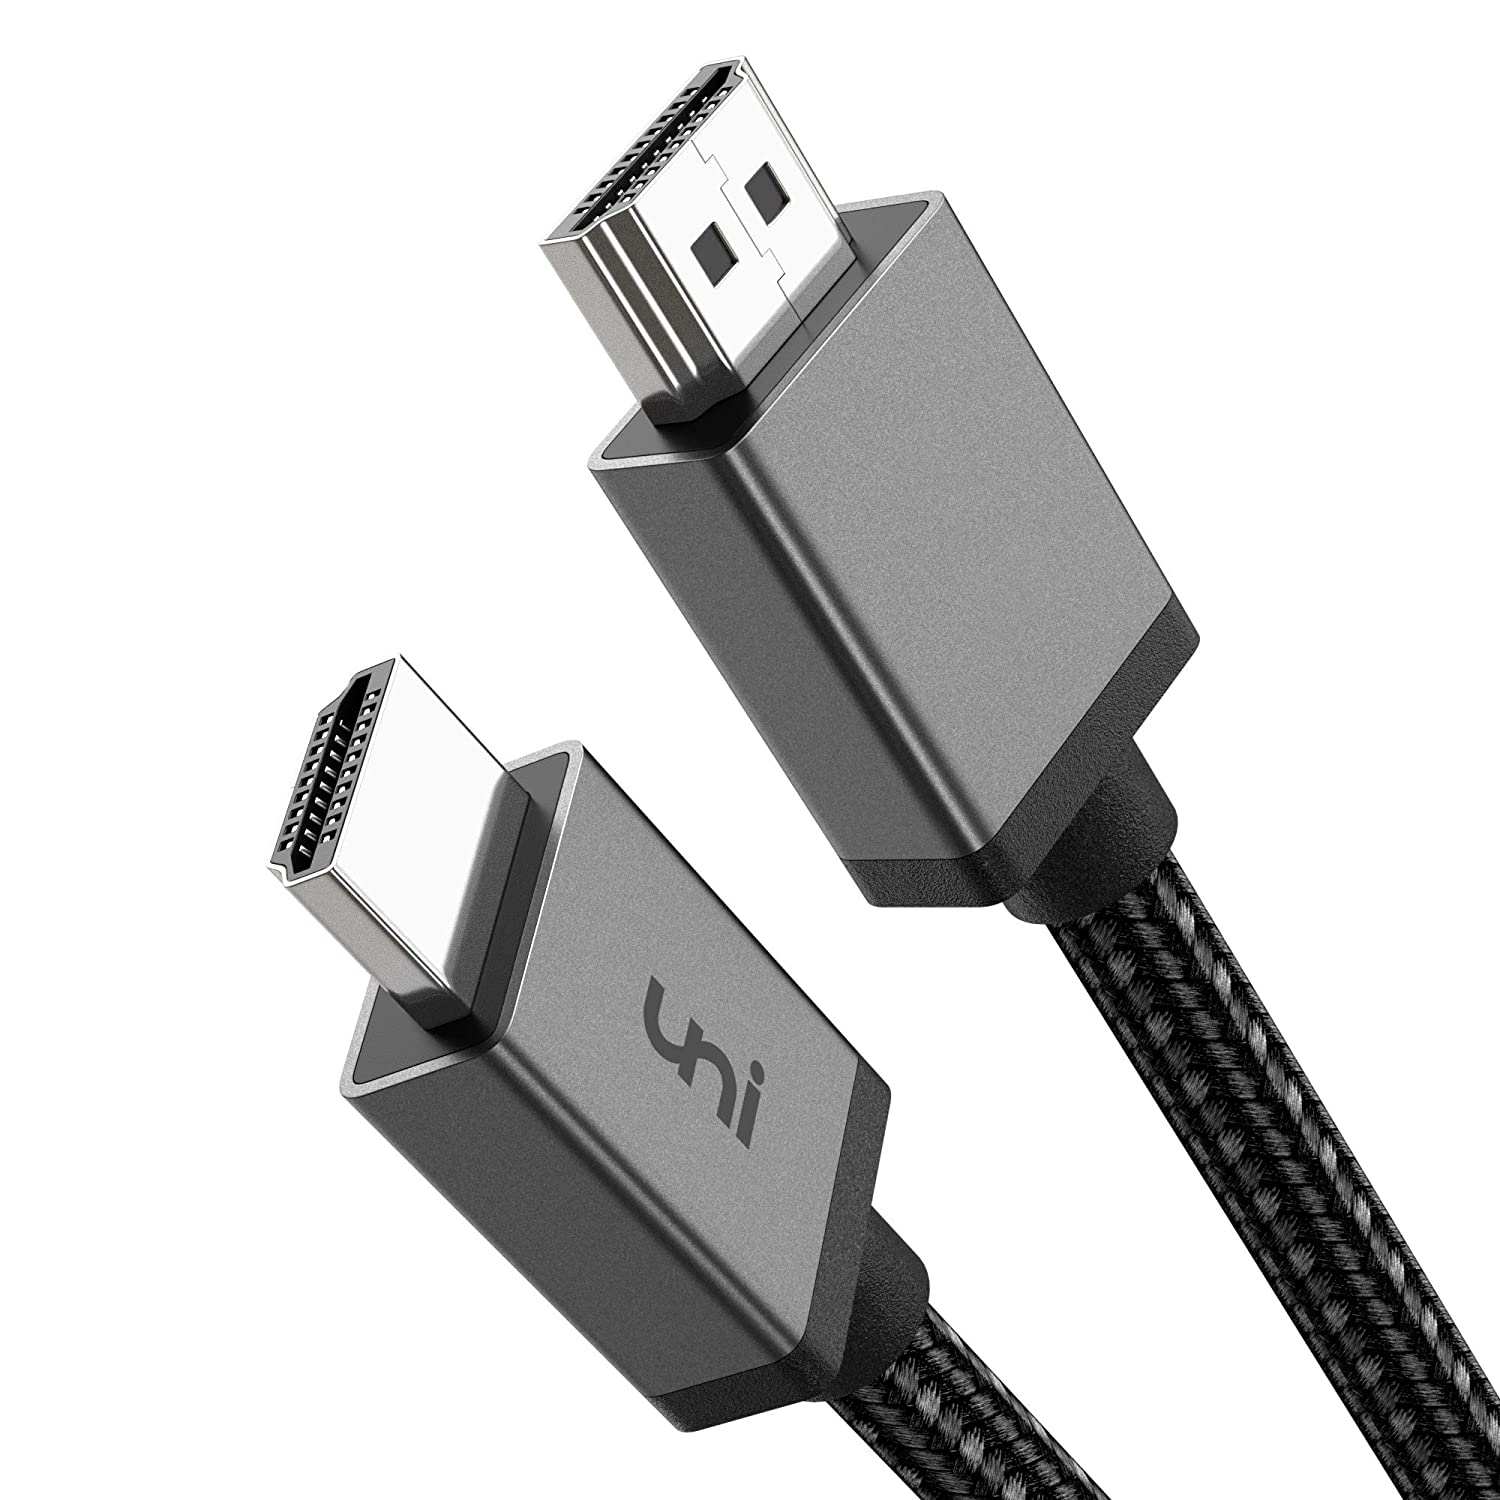 Infinitive USB-C to HDMI Cable 4K/60HZ